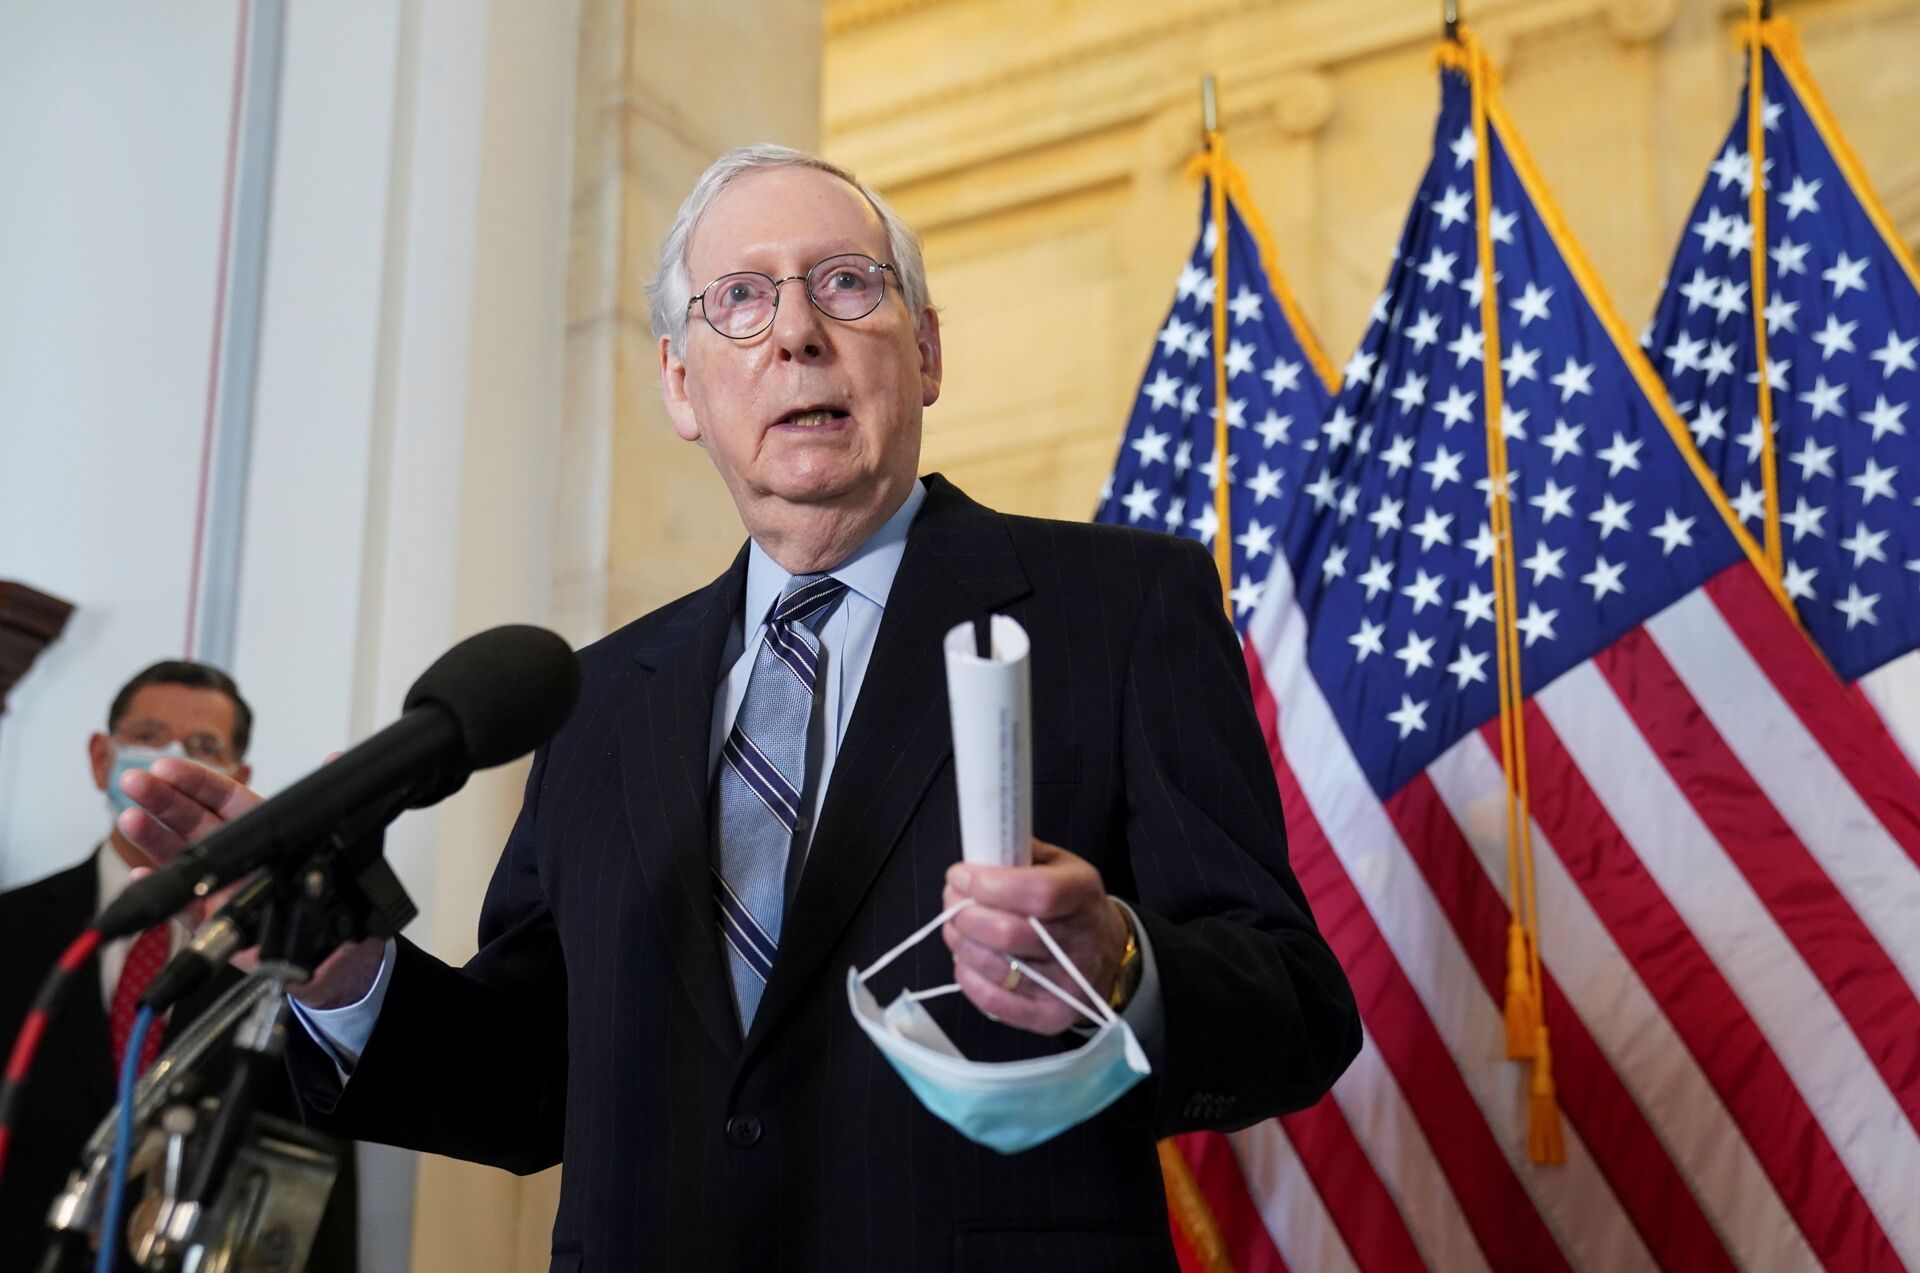 Senate Minority Leader Mitch McConnell speaks to reporters after the Senate Republican lunch on Capitol Hill in Washington, U.S., March 23, 2021 - Sputnik International, 1920, 07.09.2021